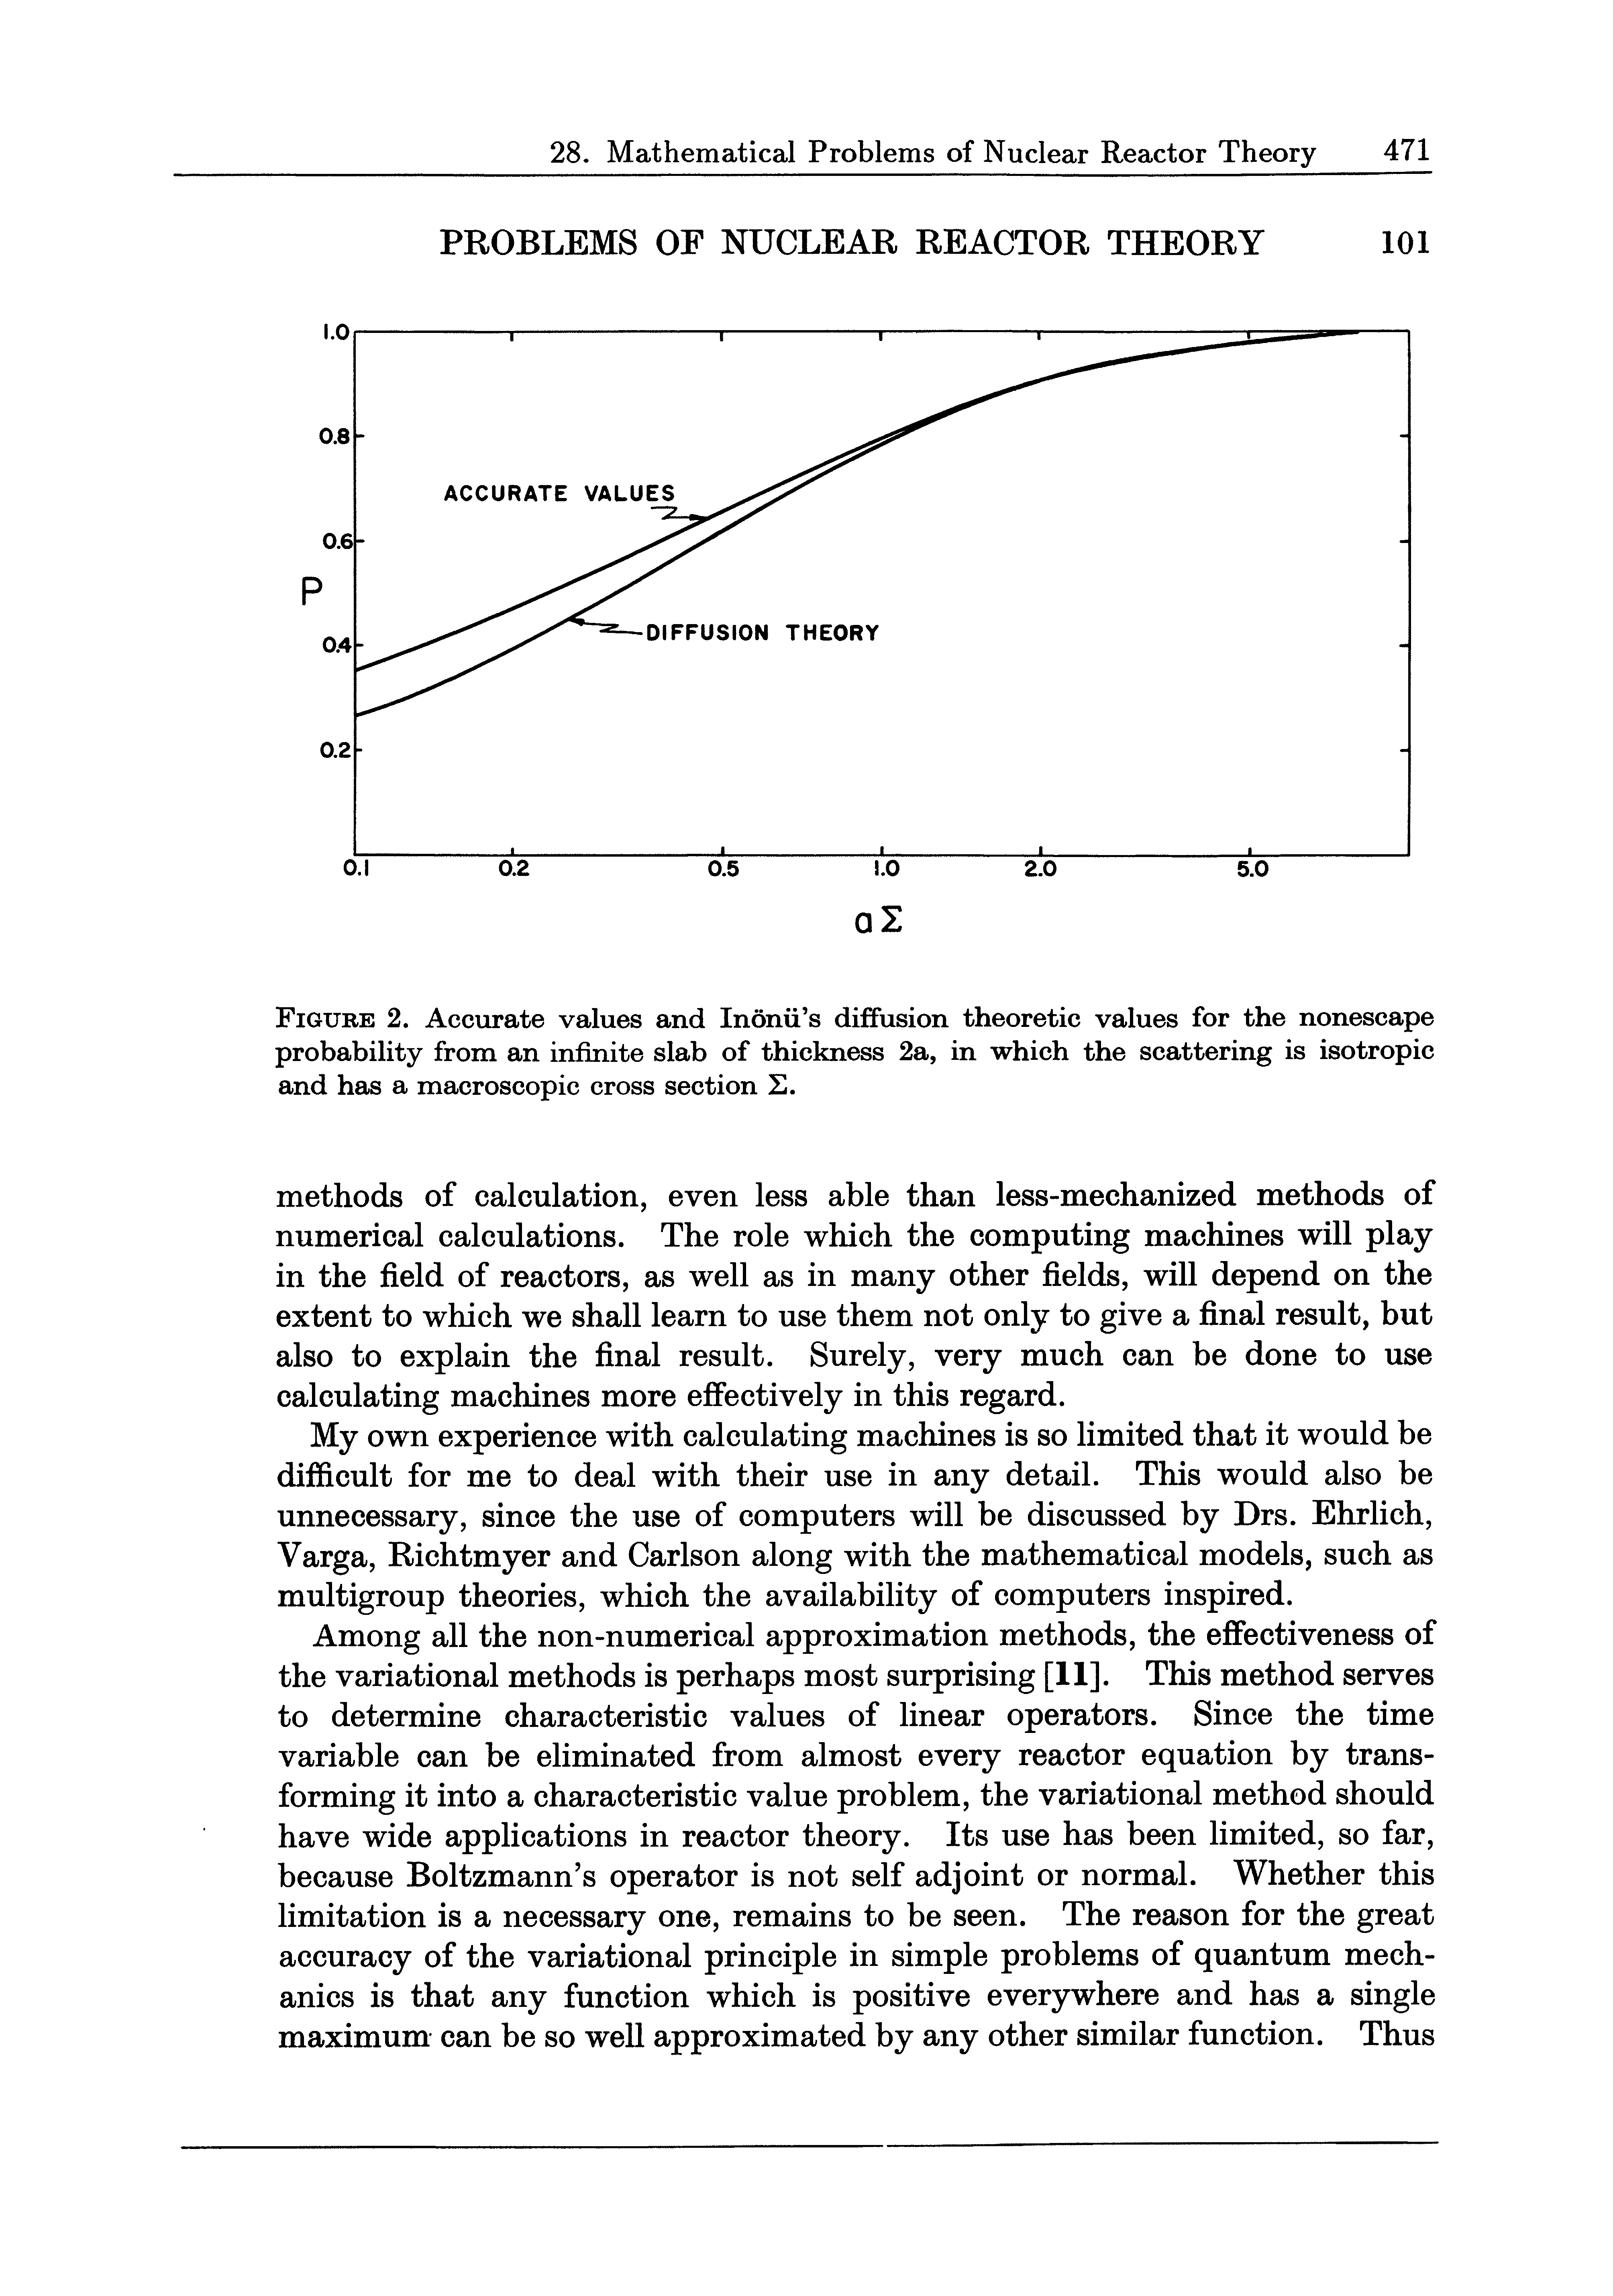 Figure 2. Accurate values and Inonii s diffusion theoretic values for the nonescape probability from an infinite slab of thickness 2a, in which the scattering is isotropic and has a macroscopic cross section S.